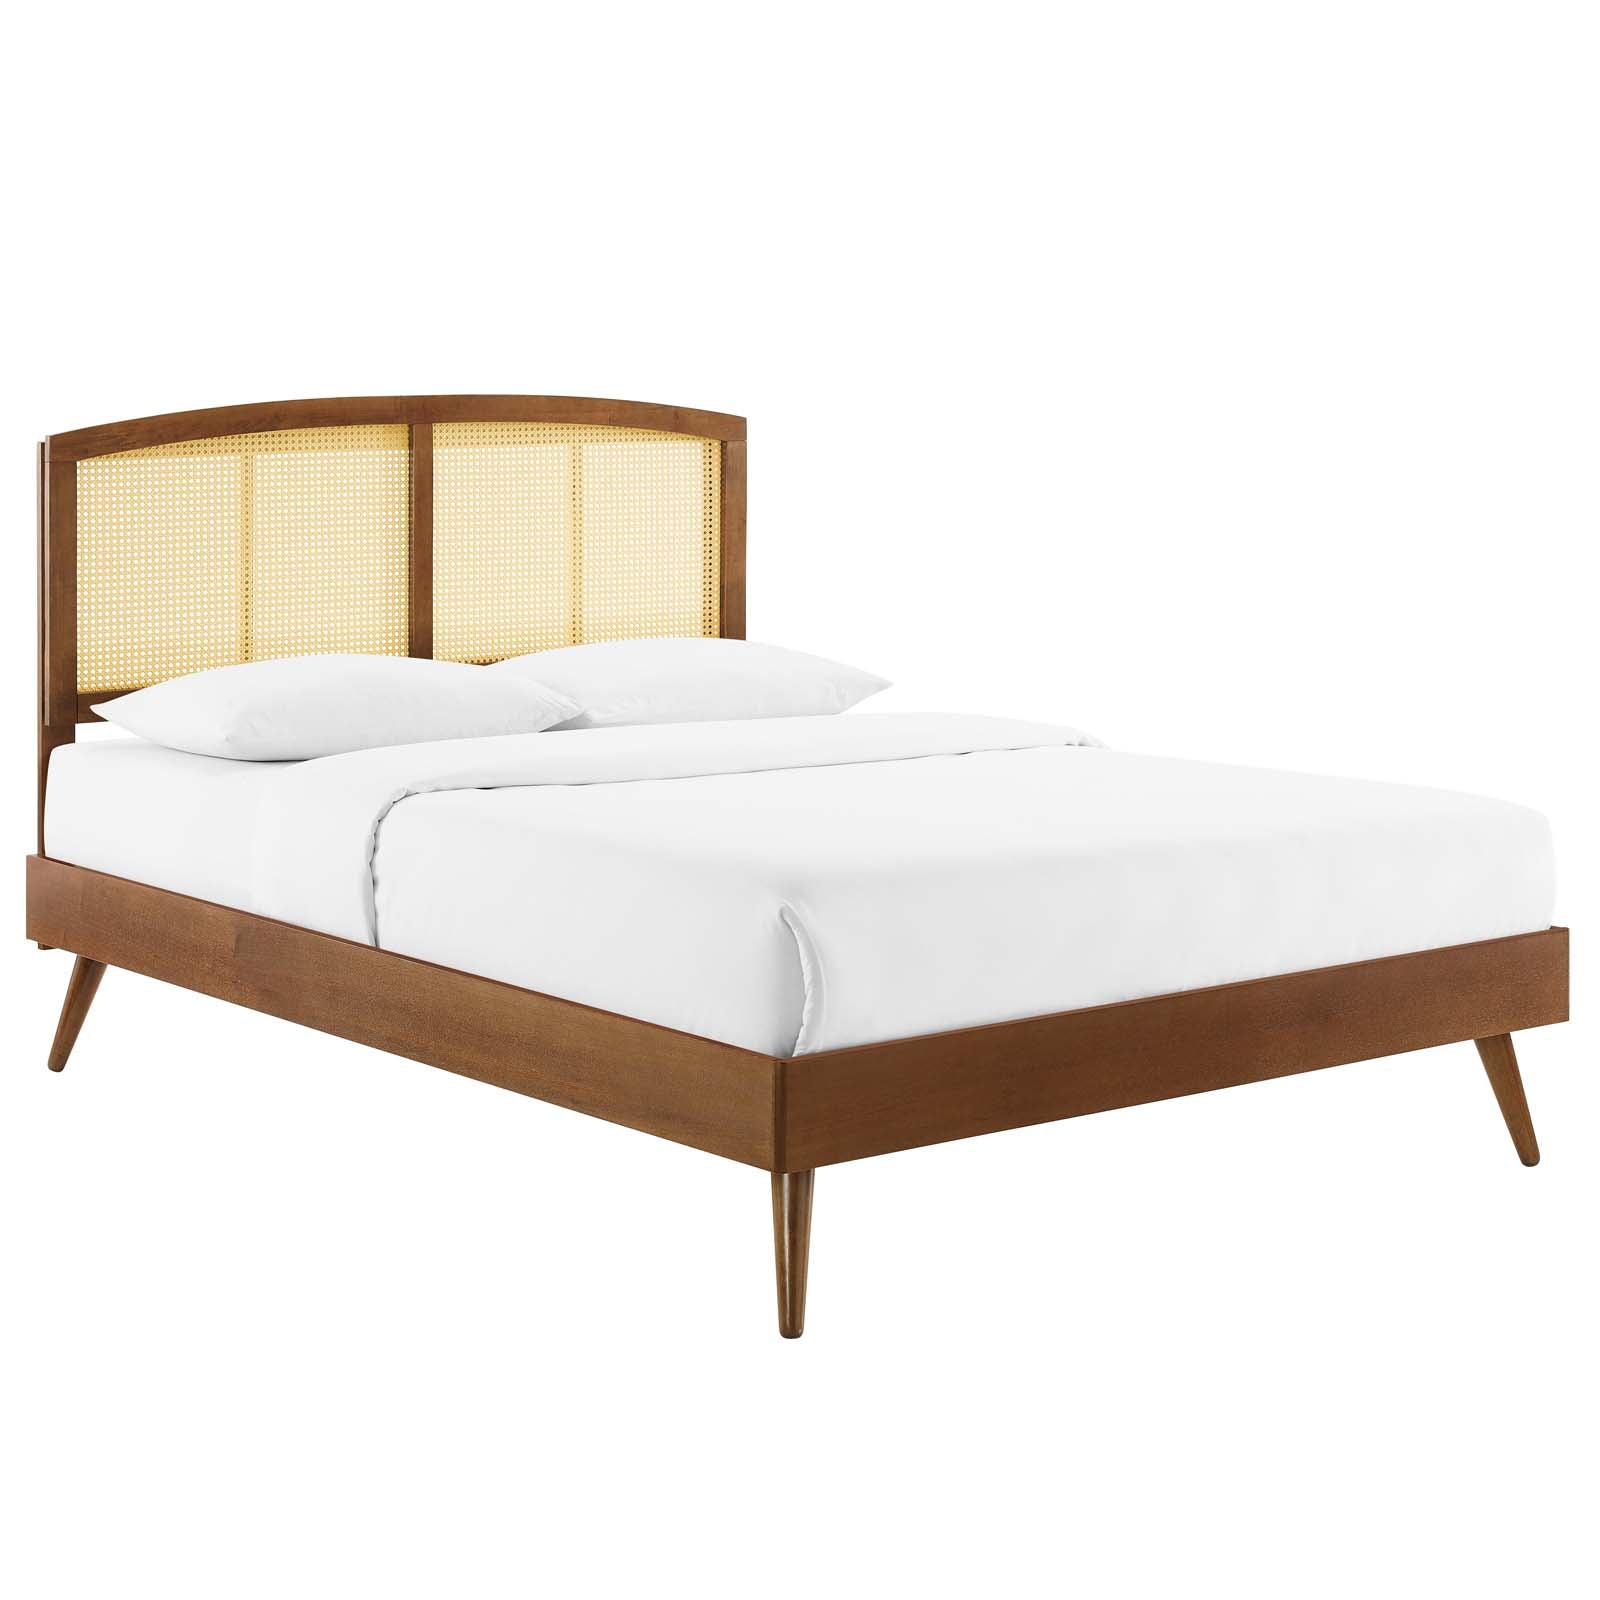 Modway Beds - Sierra-Cane-and-Wood-Queen-Platform-Bed-With-Splayed-Legs-Walnut